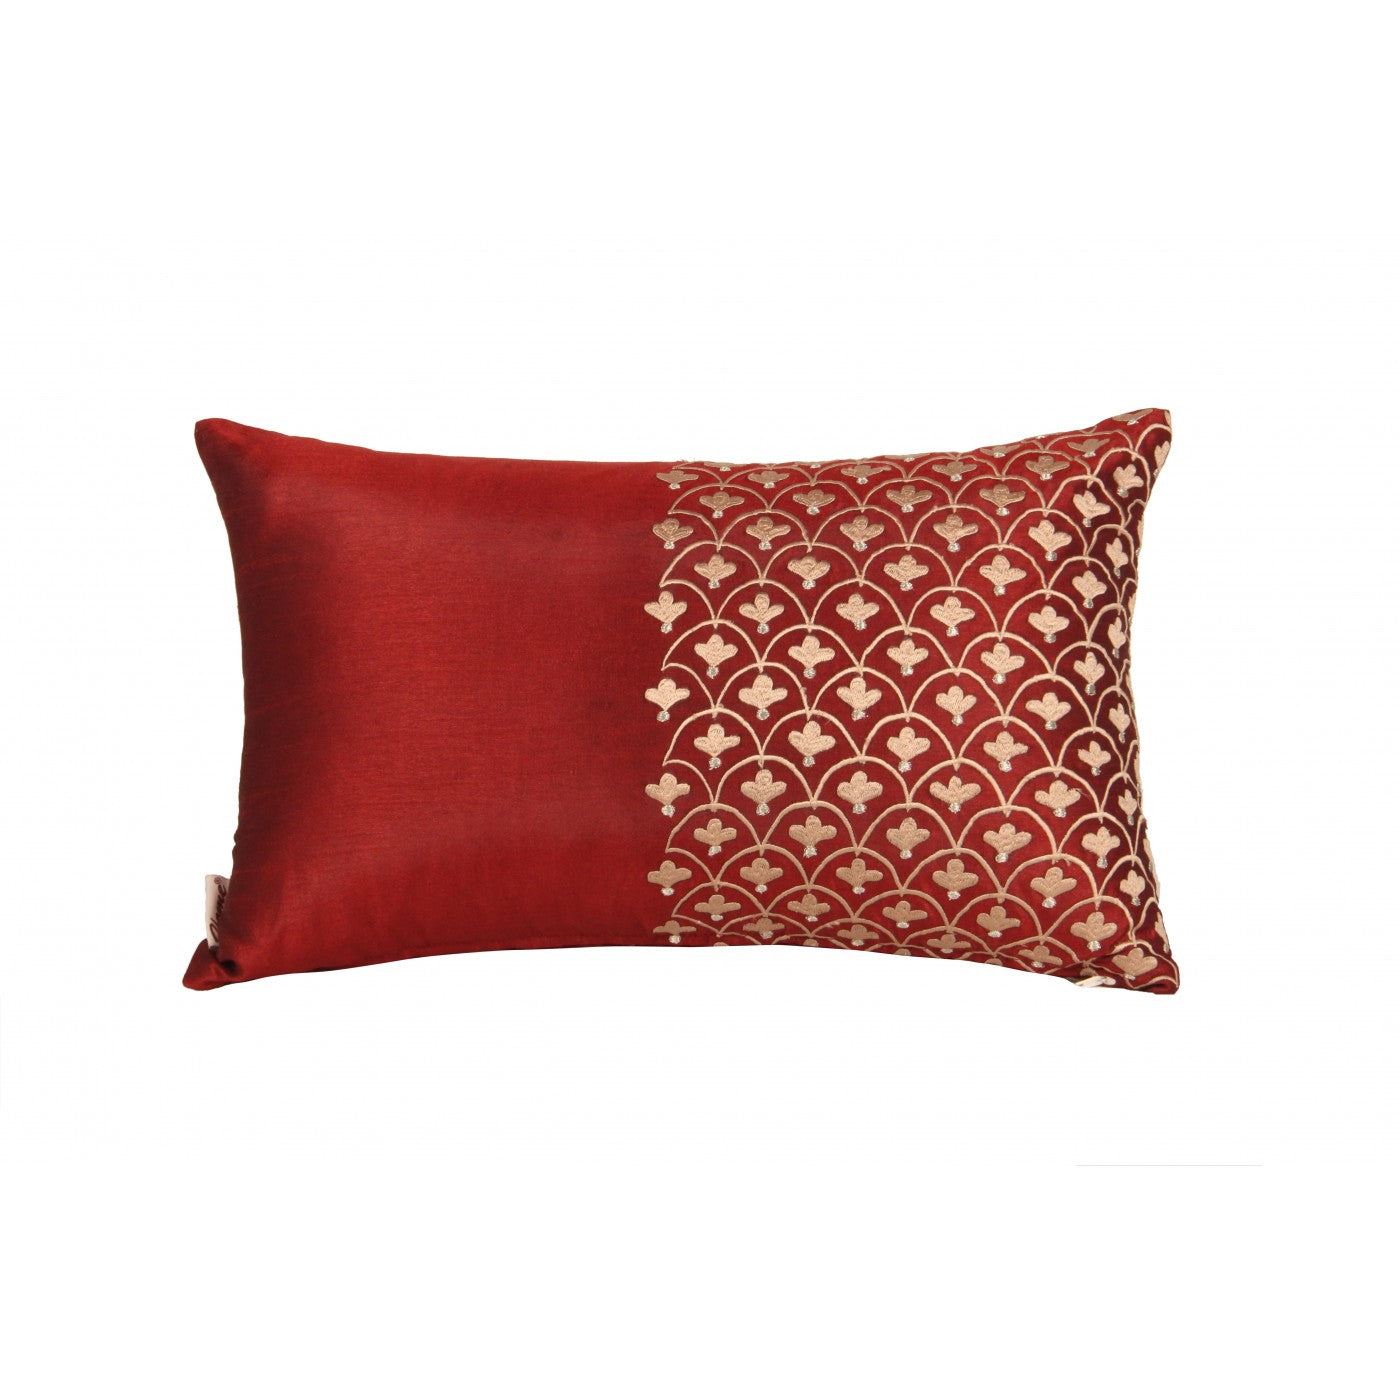 Elegant Festive Maroon Embroidered Cushion Cover 12x18 Inches